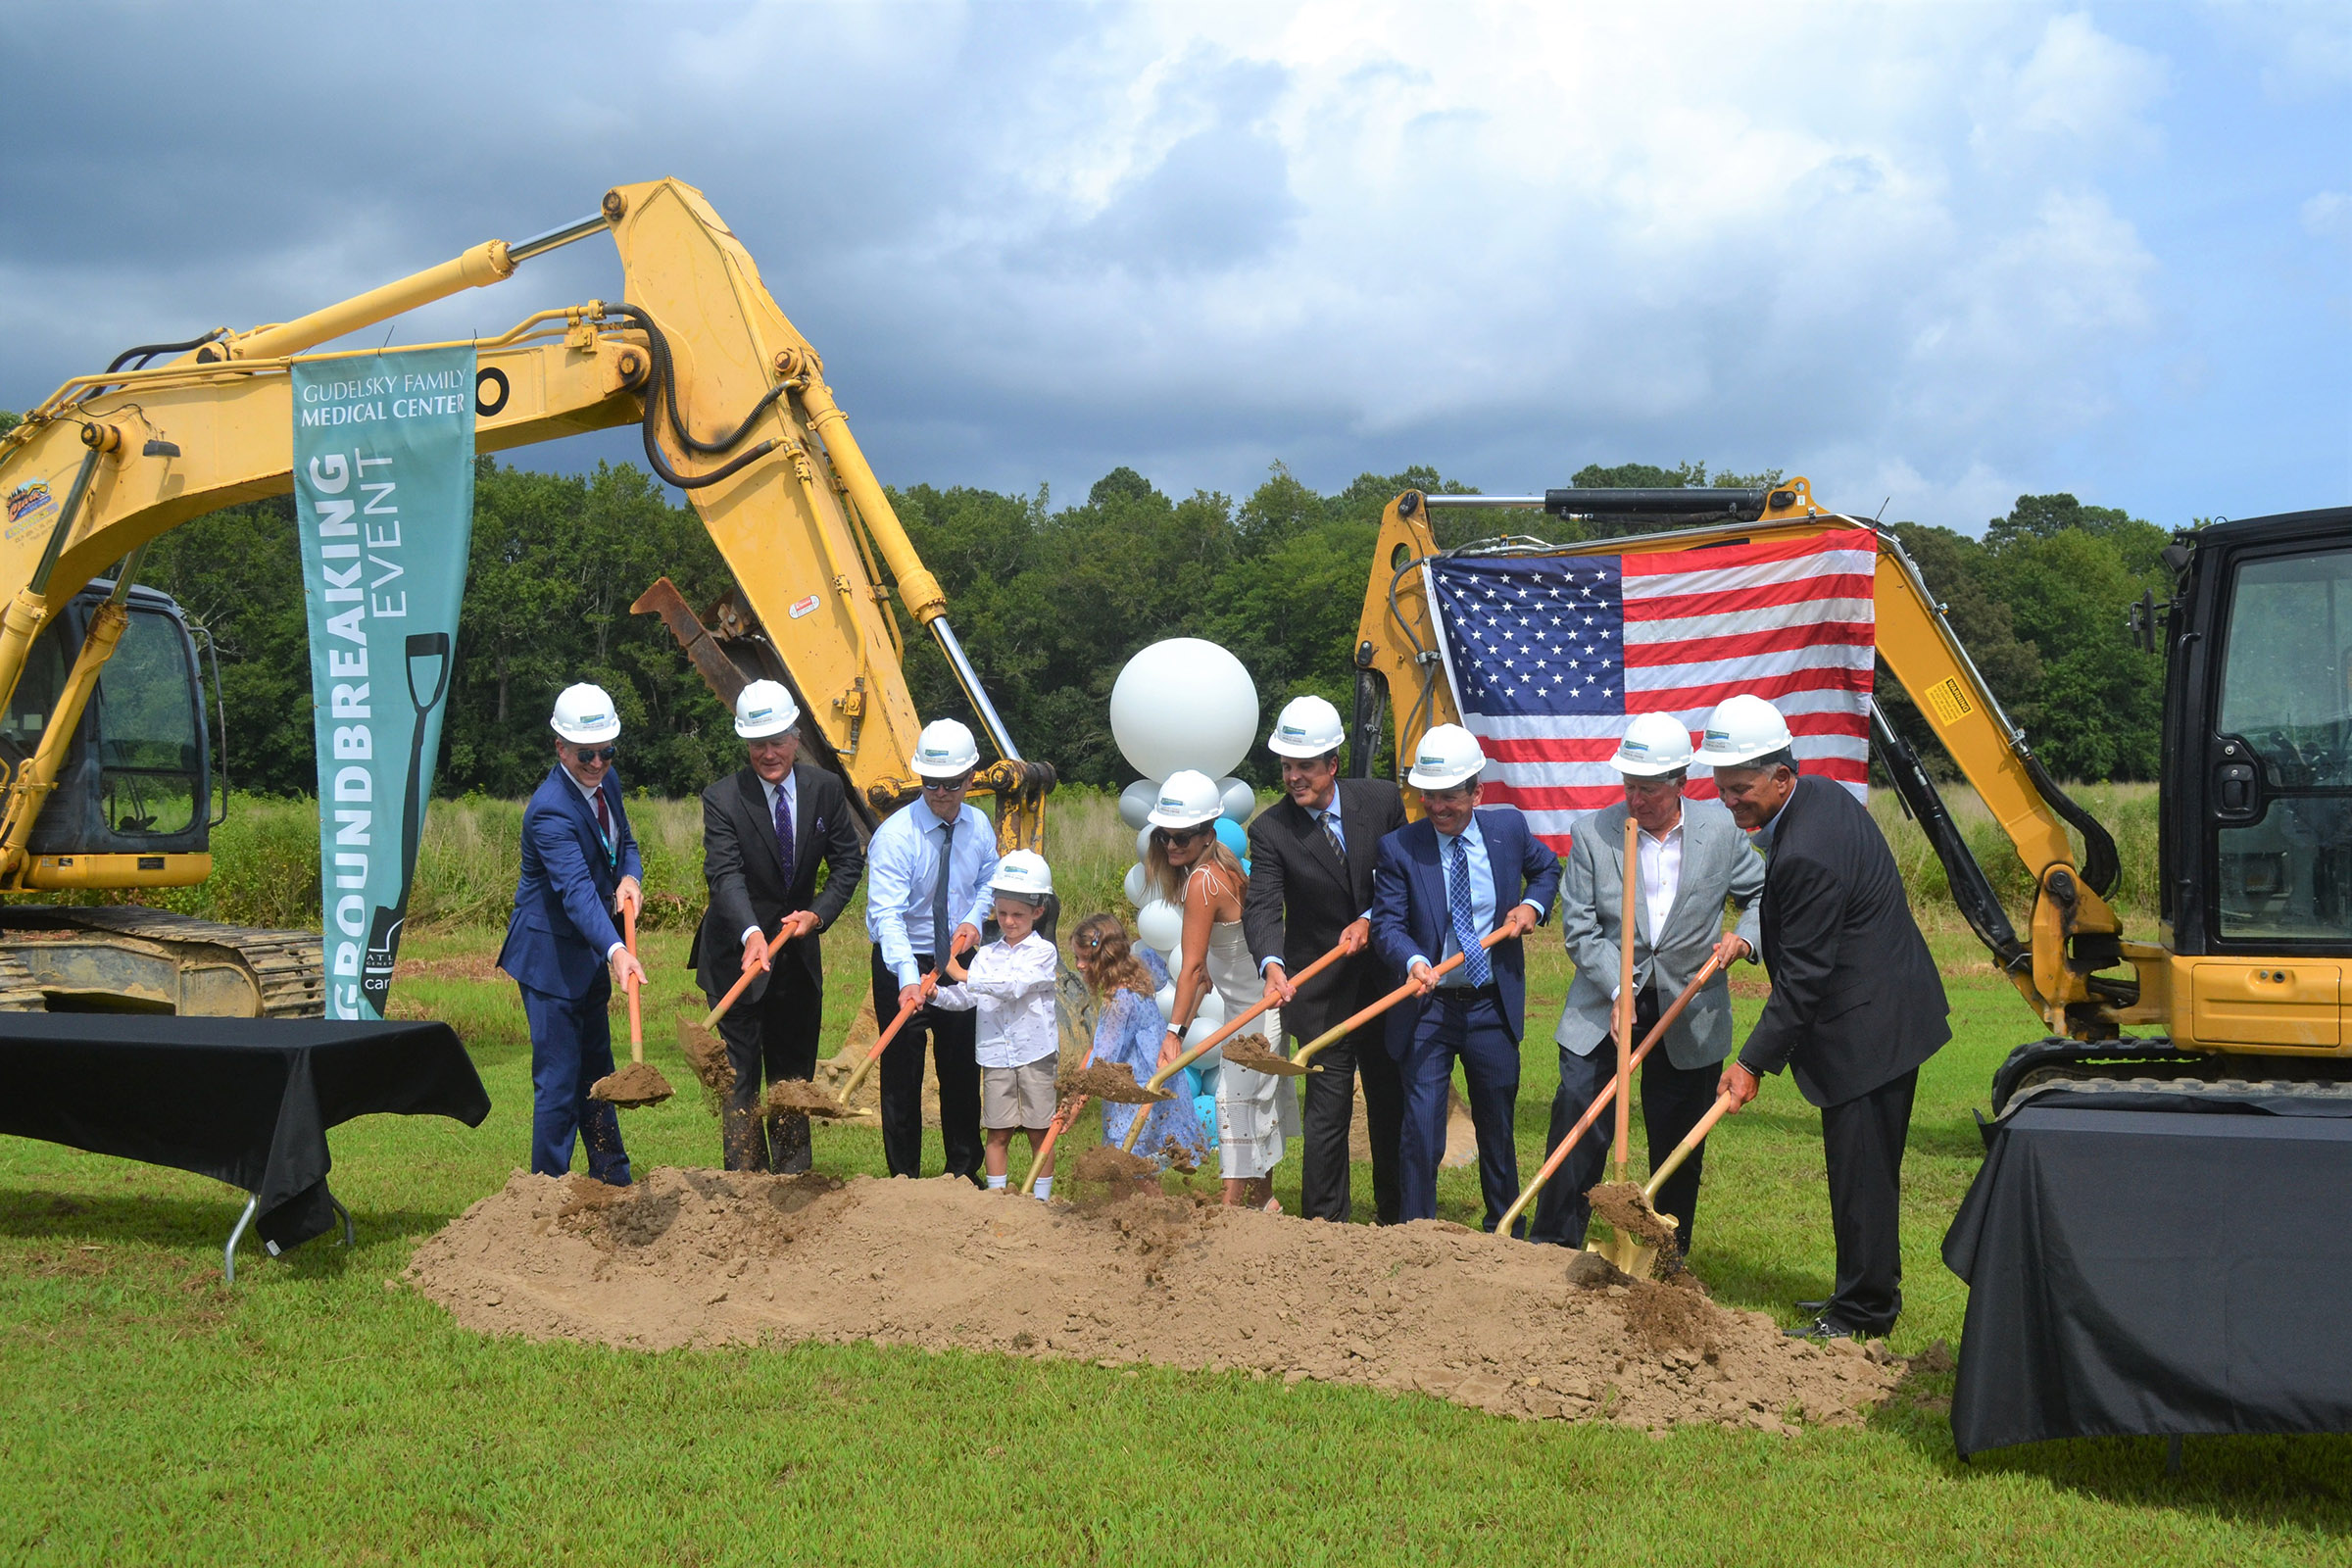 AGH Kicks Off Gudelsky Family Medical Center Construction Off Route 589